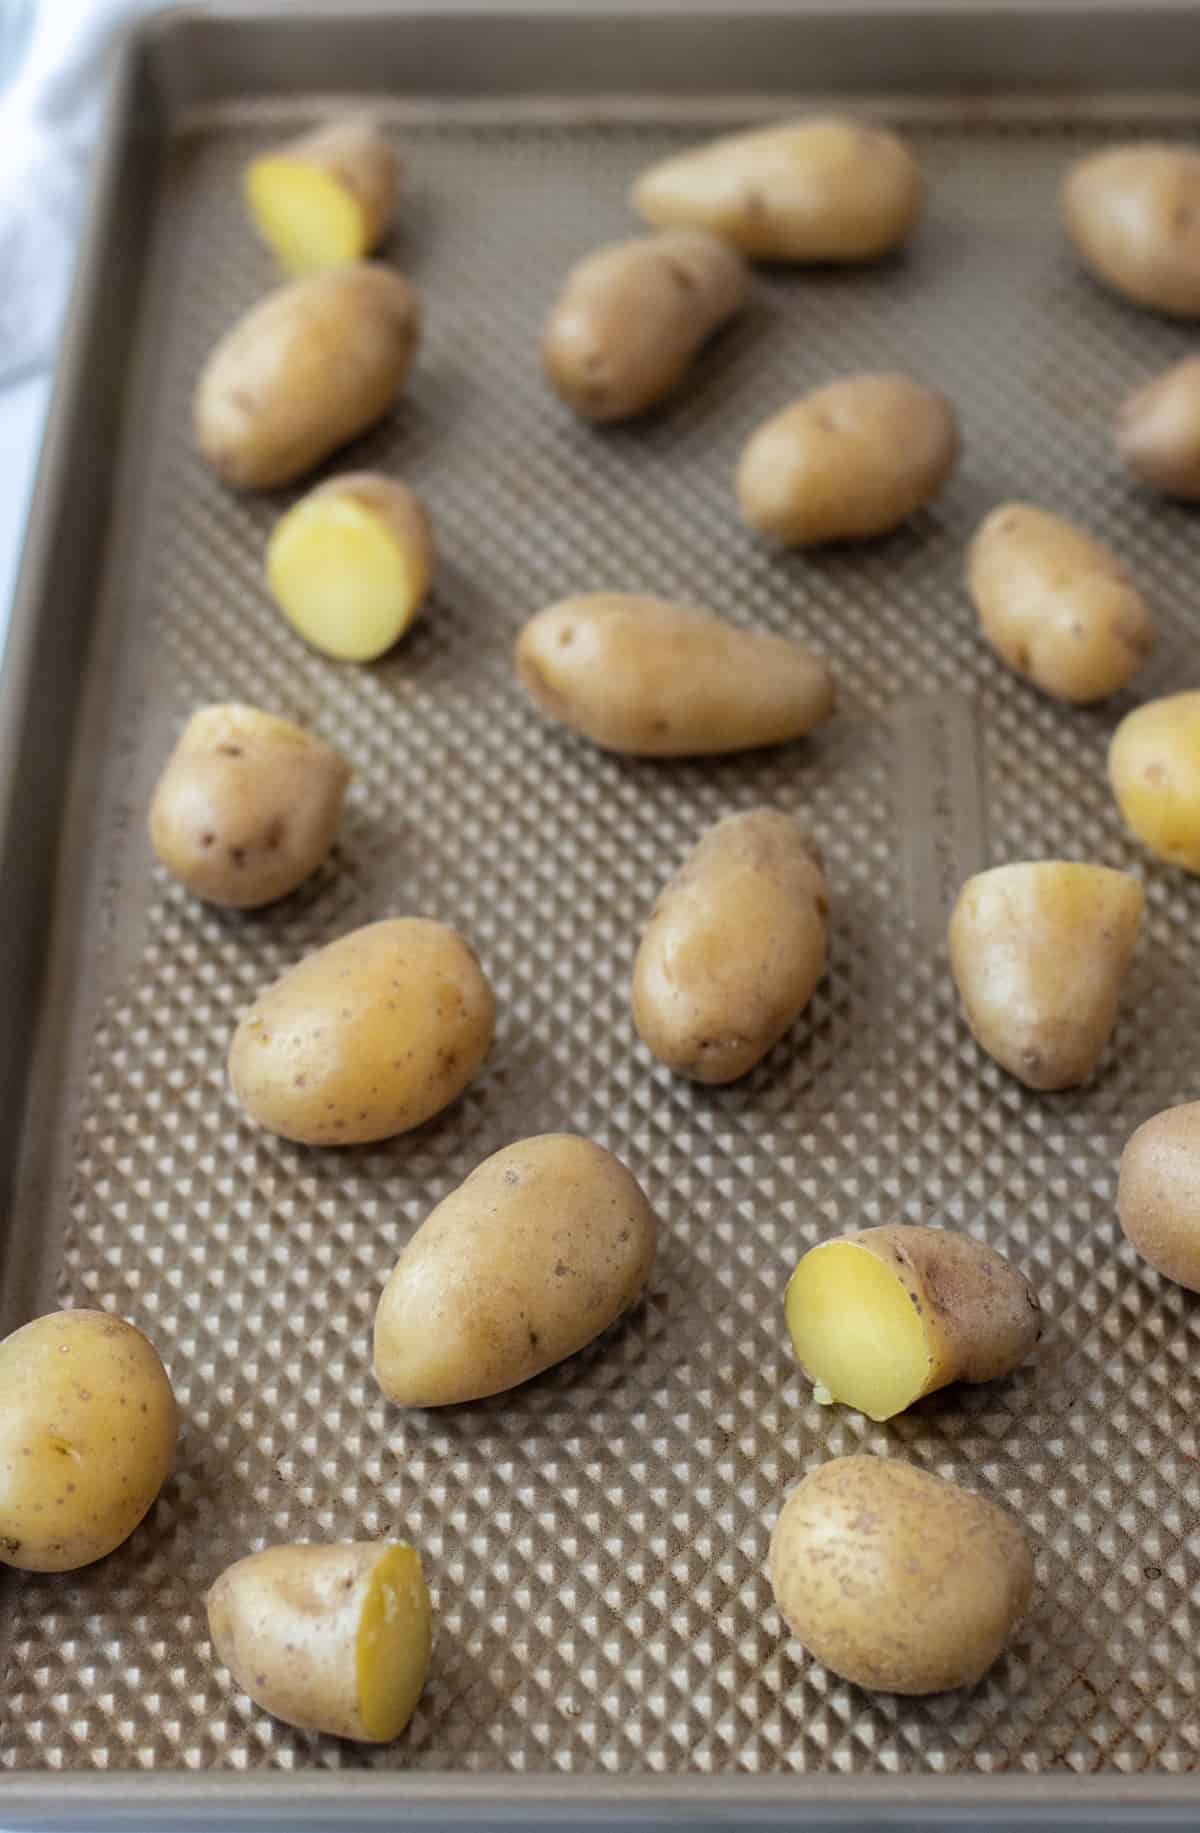 Boiled fingerling potatoes spread out on a baking sheet.